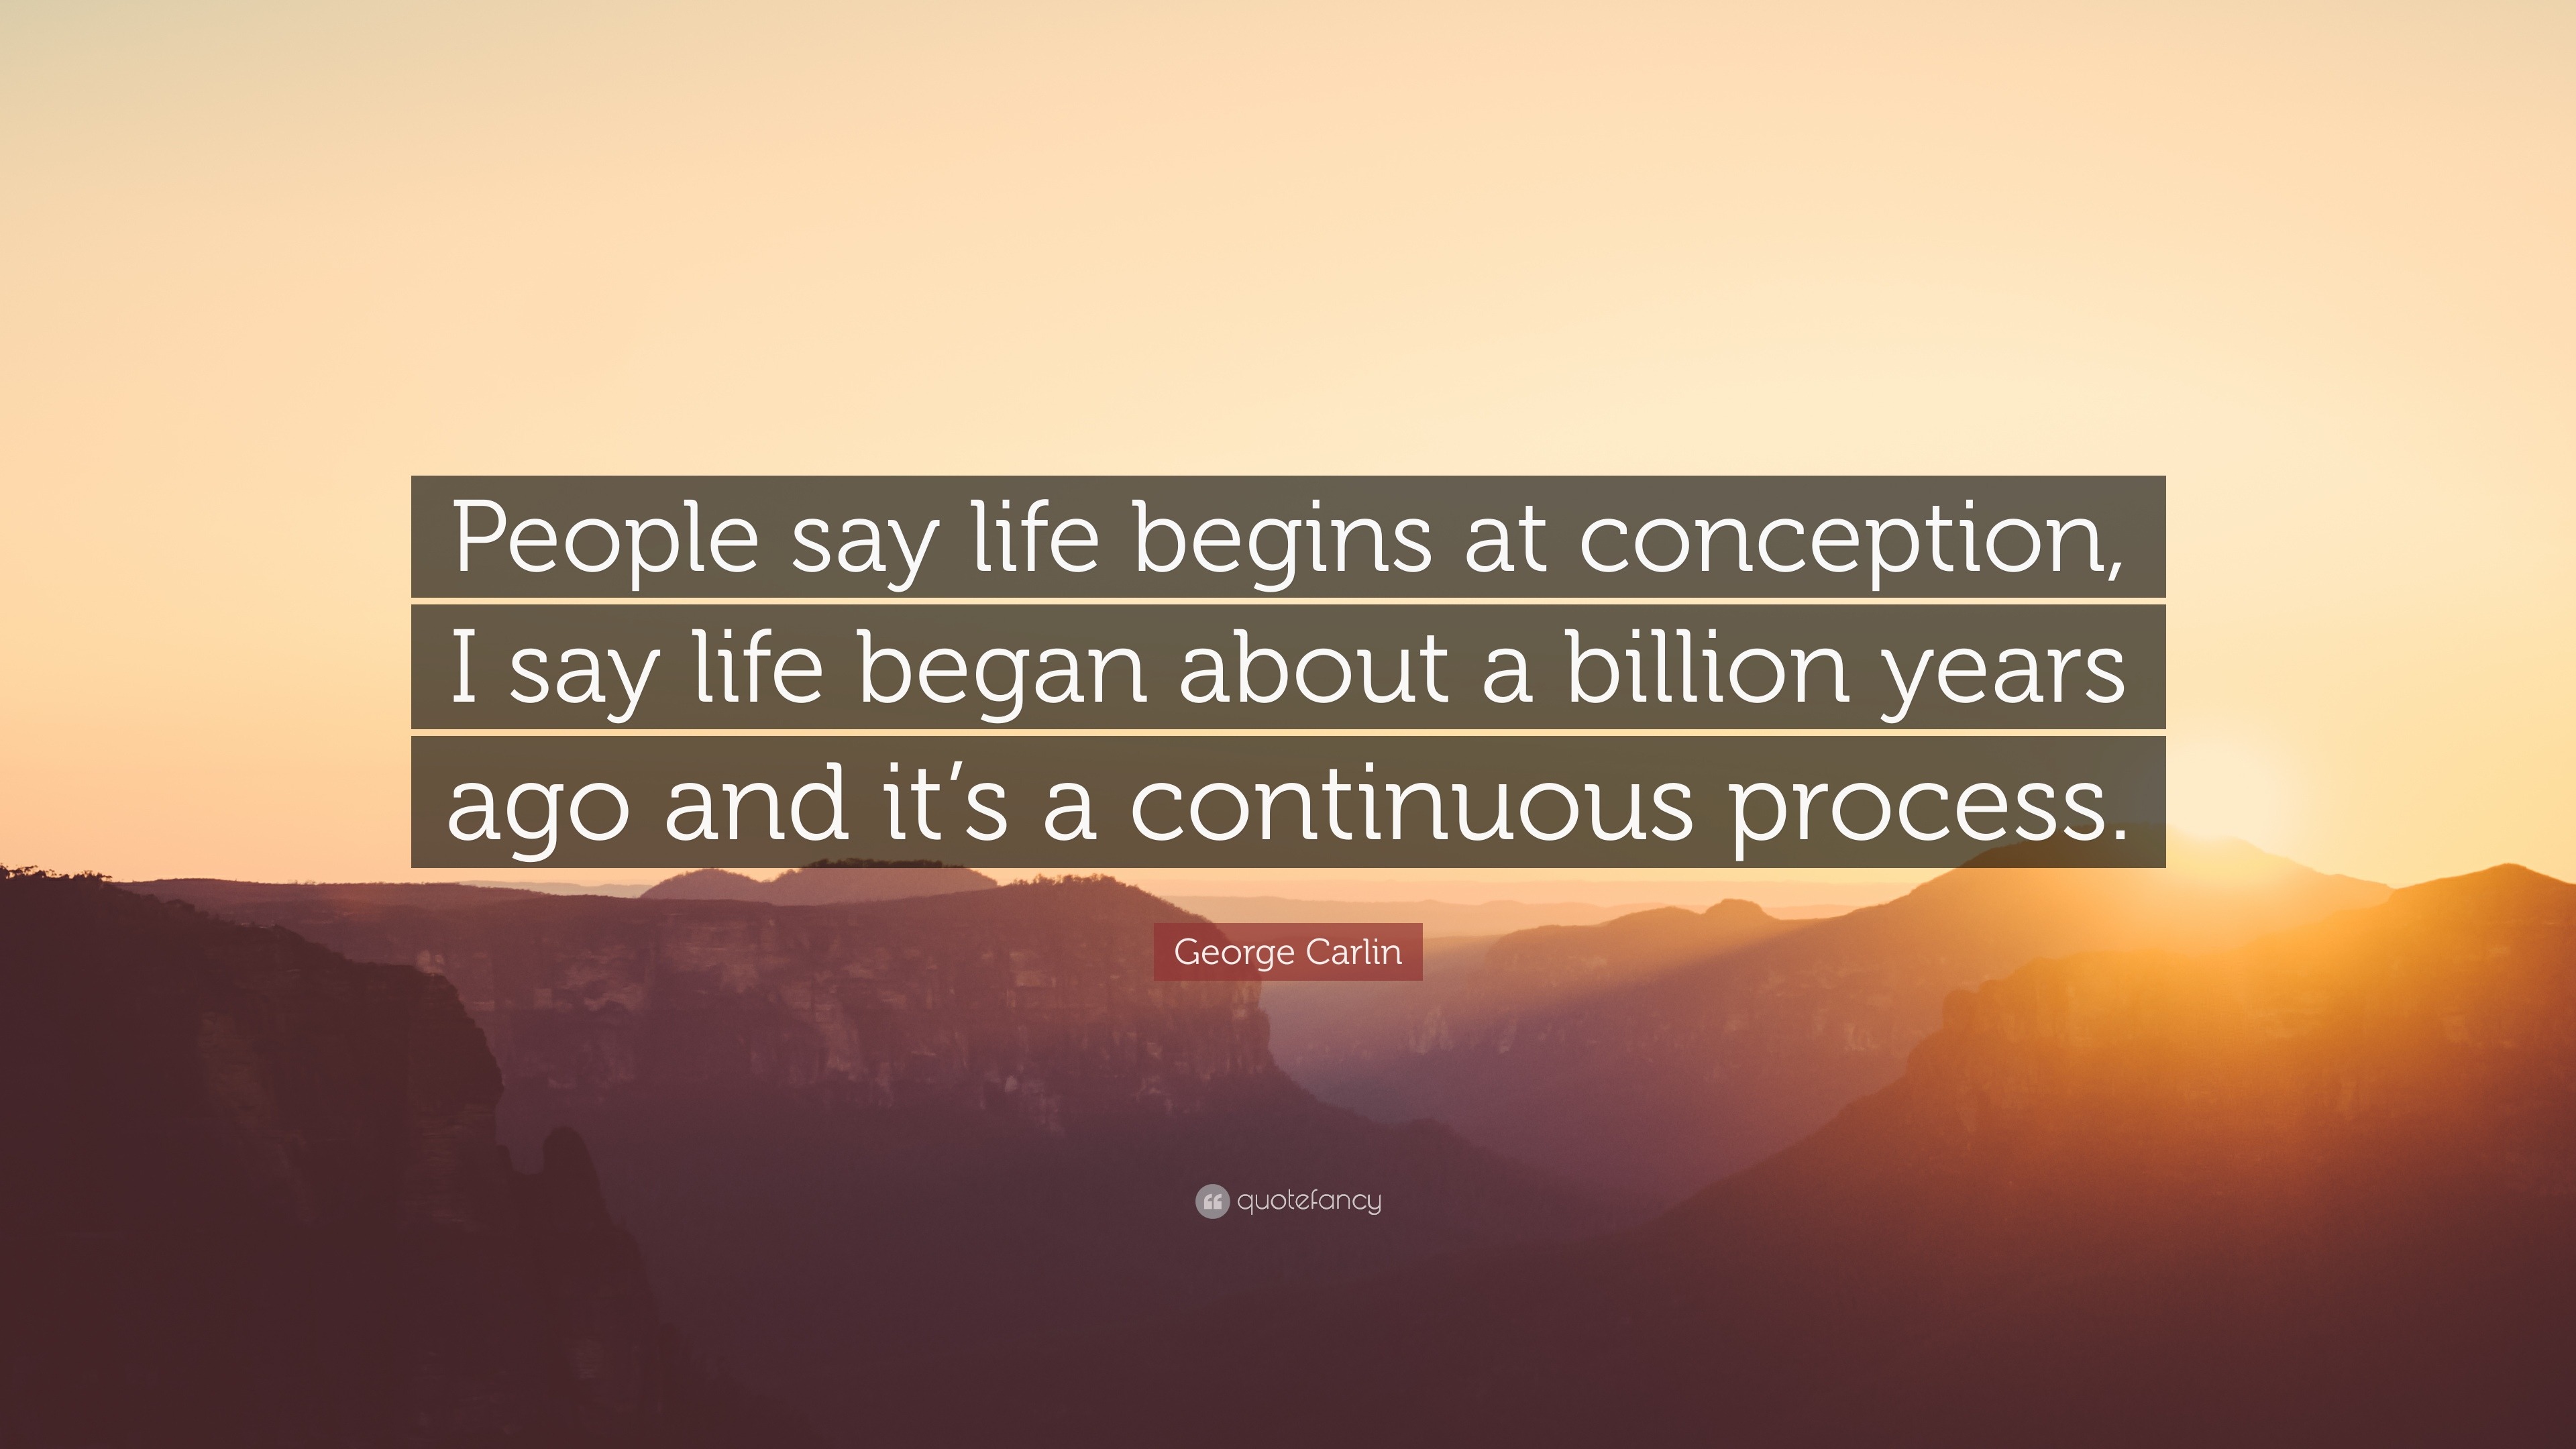 400923-George-Carlin-Quote-People-say-life-begins-at-conception-I-say.jpg